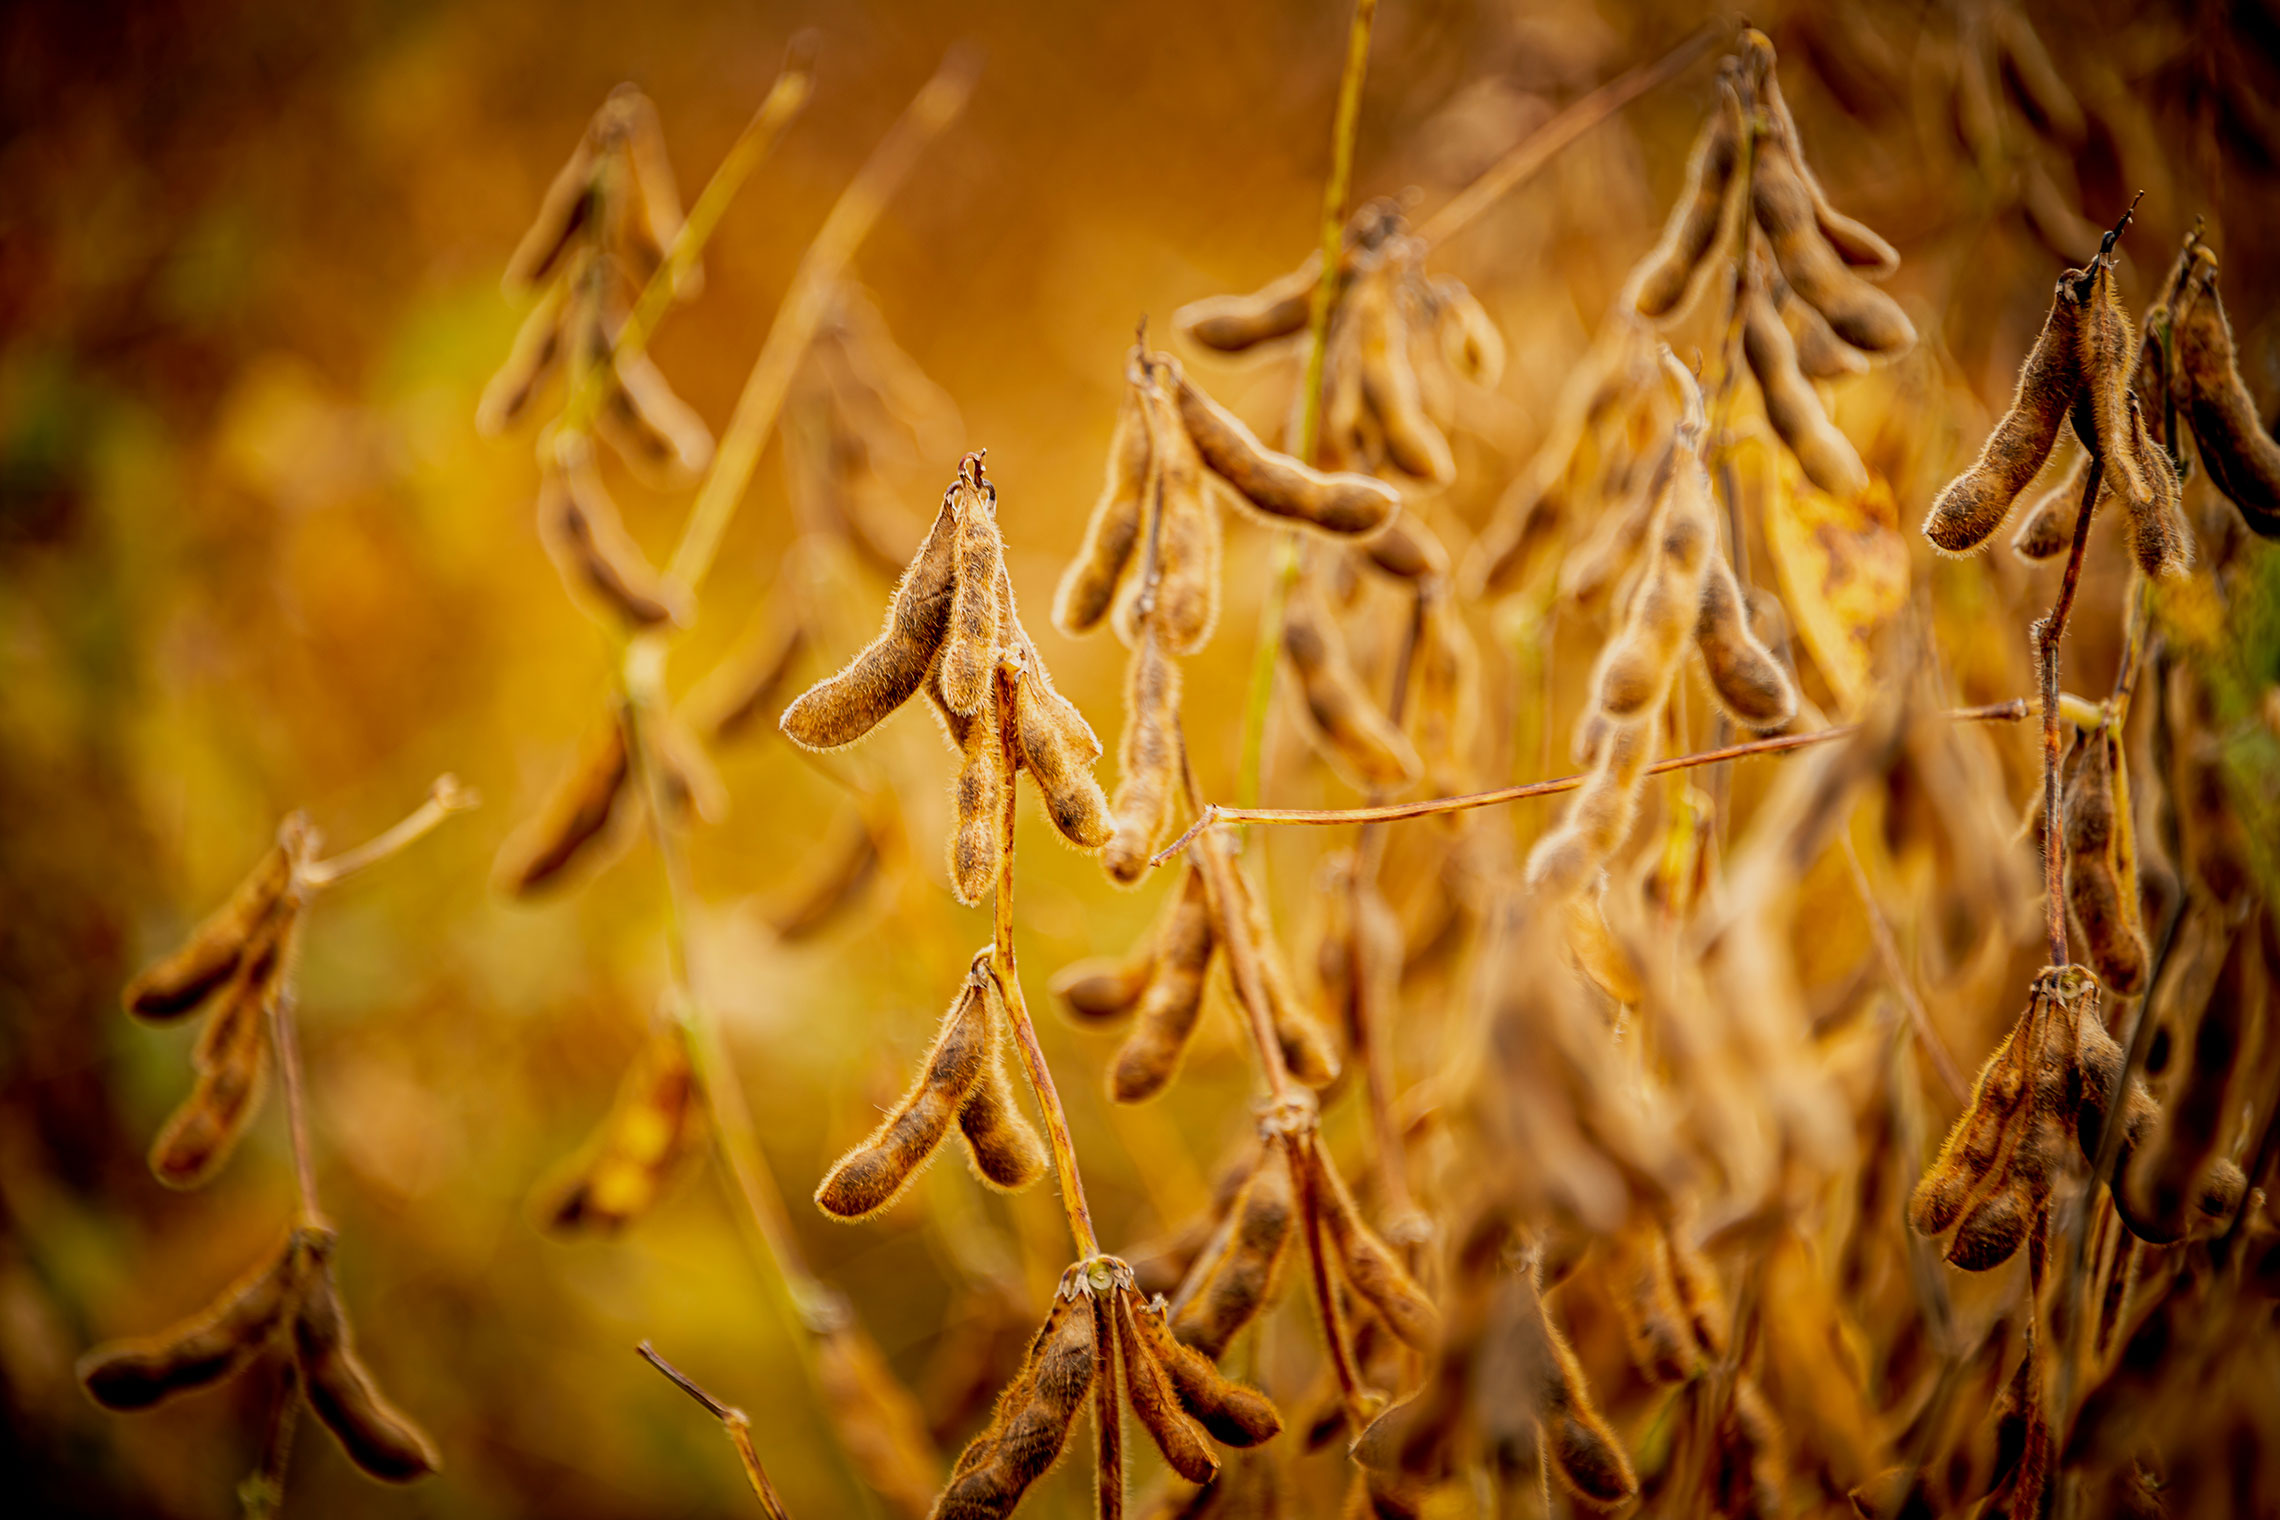 MSU tackles climate change threats to soybean production through collaborative $6M NSF grant 